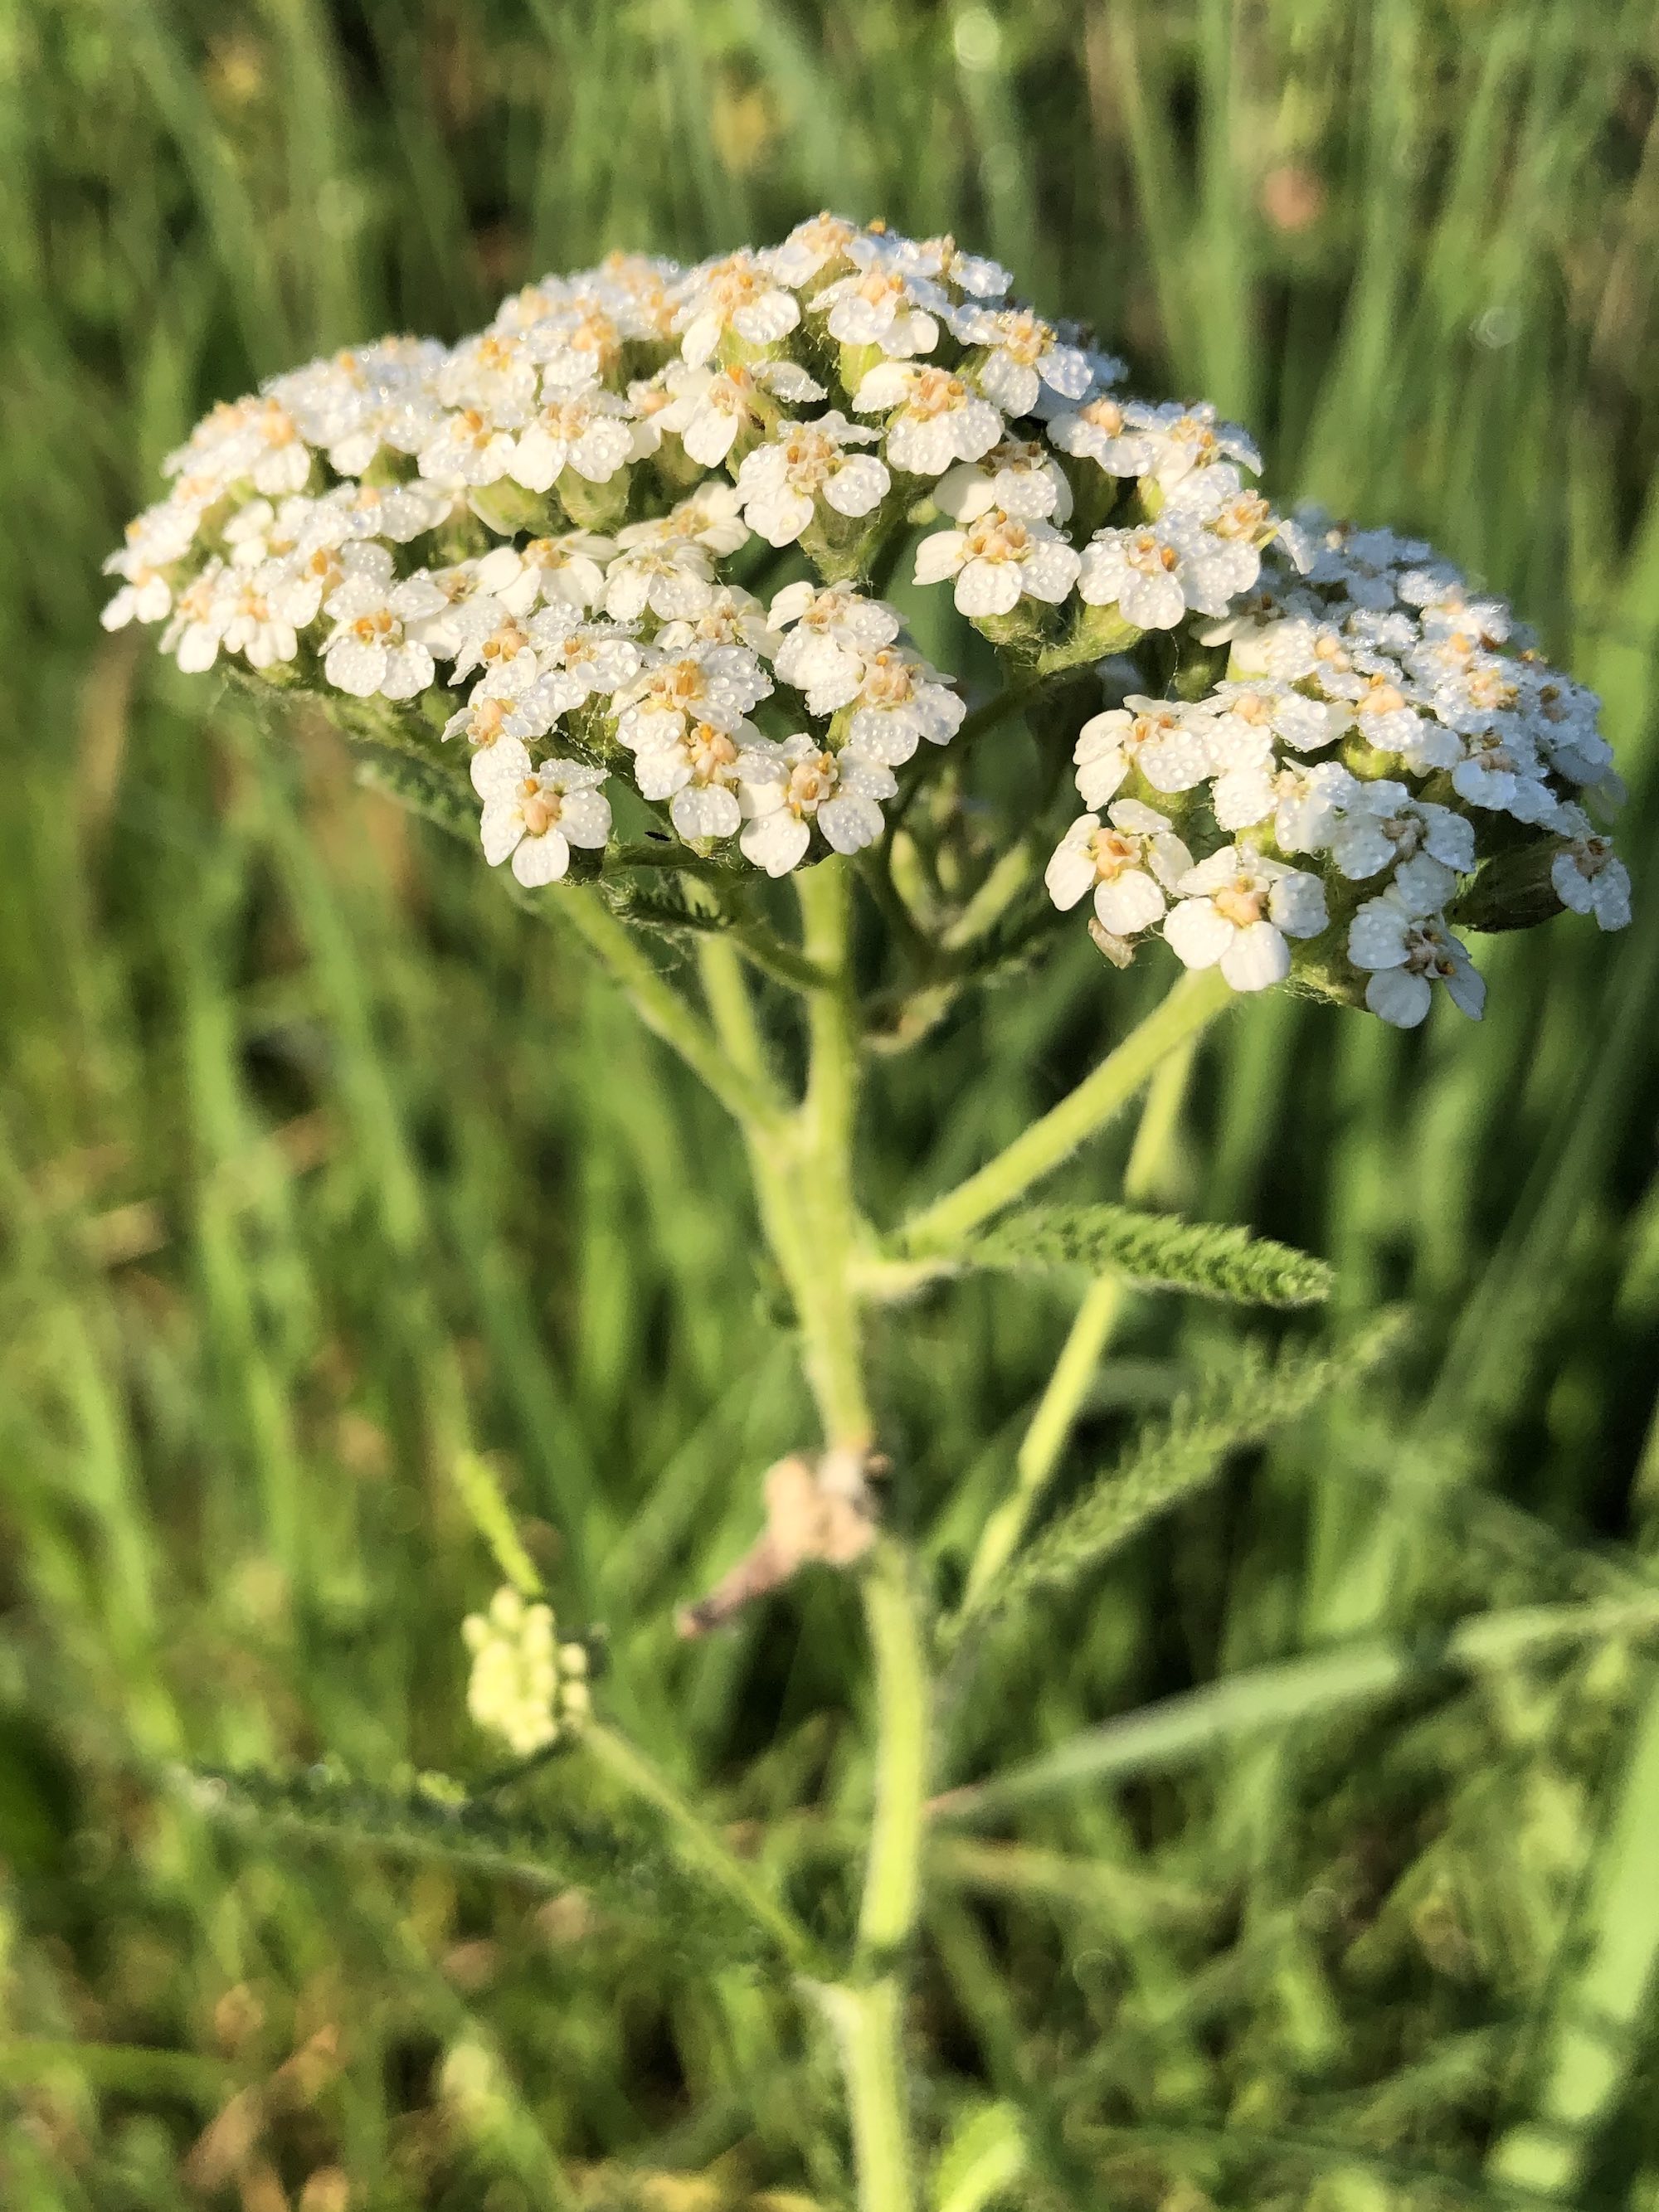 Common Yarrow on shore of Marion Dunn Pond on June 12, 2021.